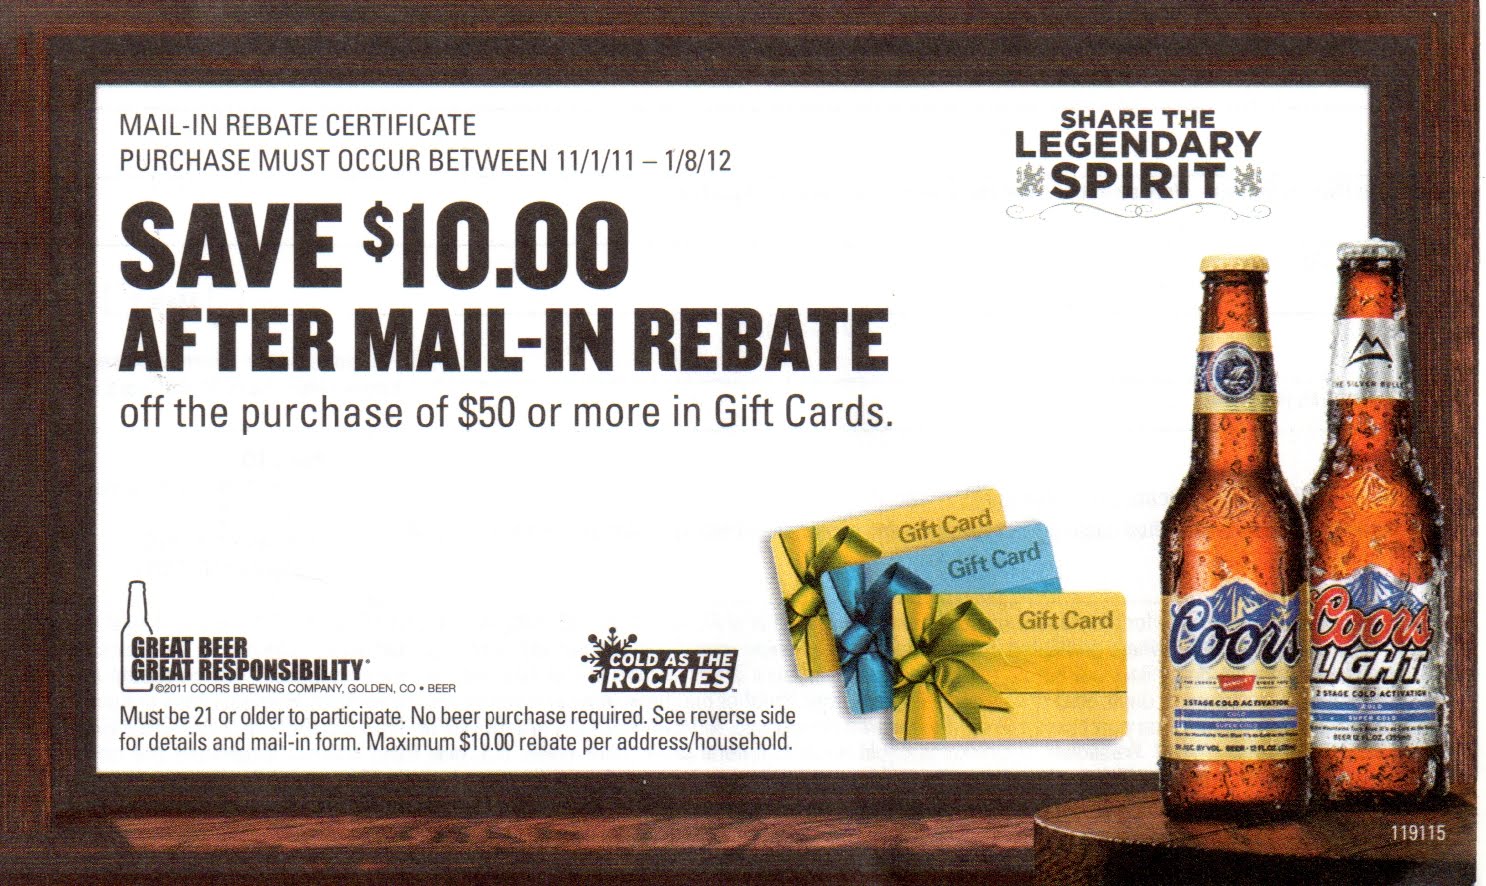 coupon-stl-coors-beer-rebate-10-on-gift-card-purchase